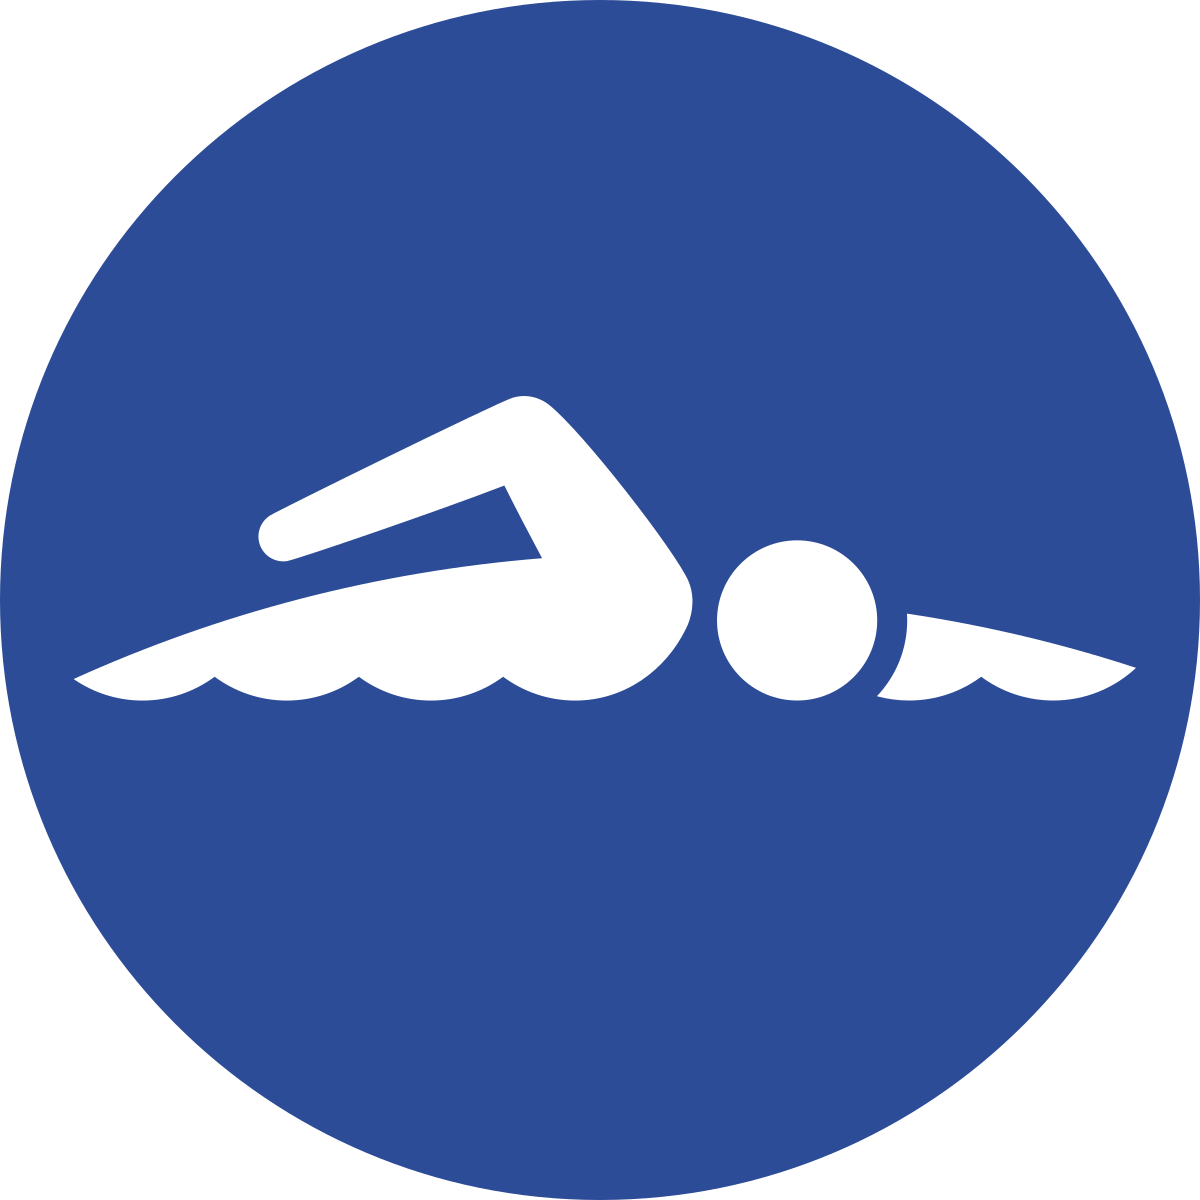 Swimming olympic games tokyo 2020